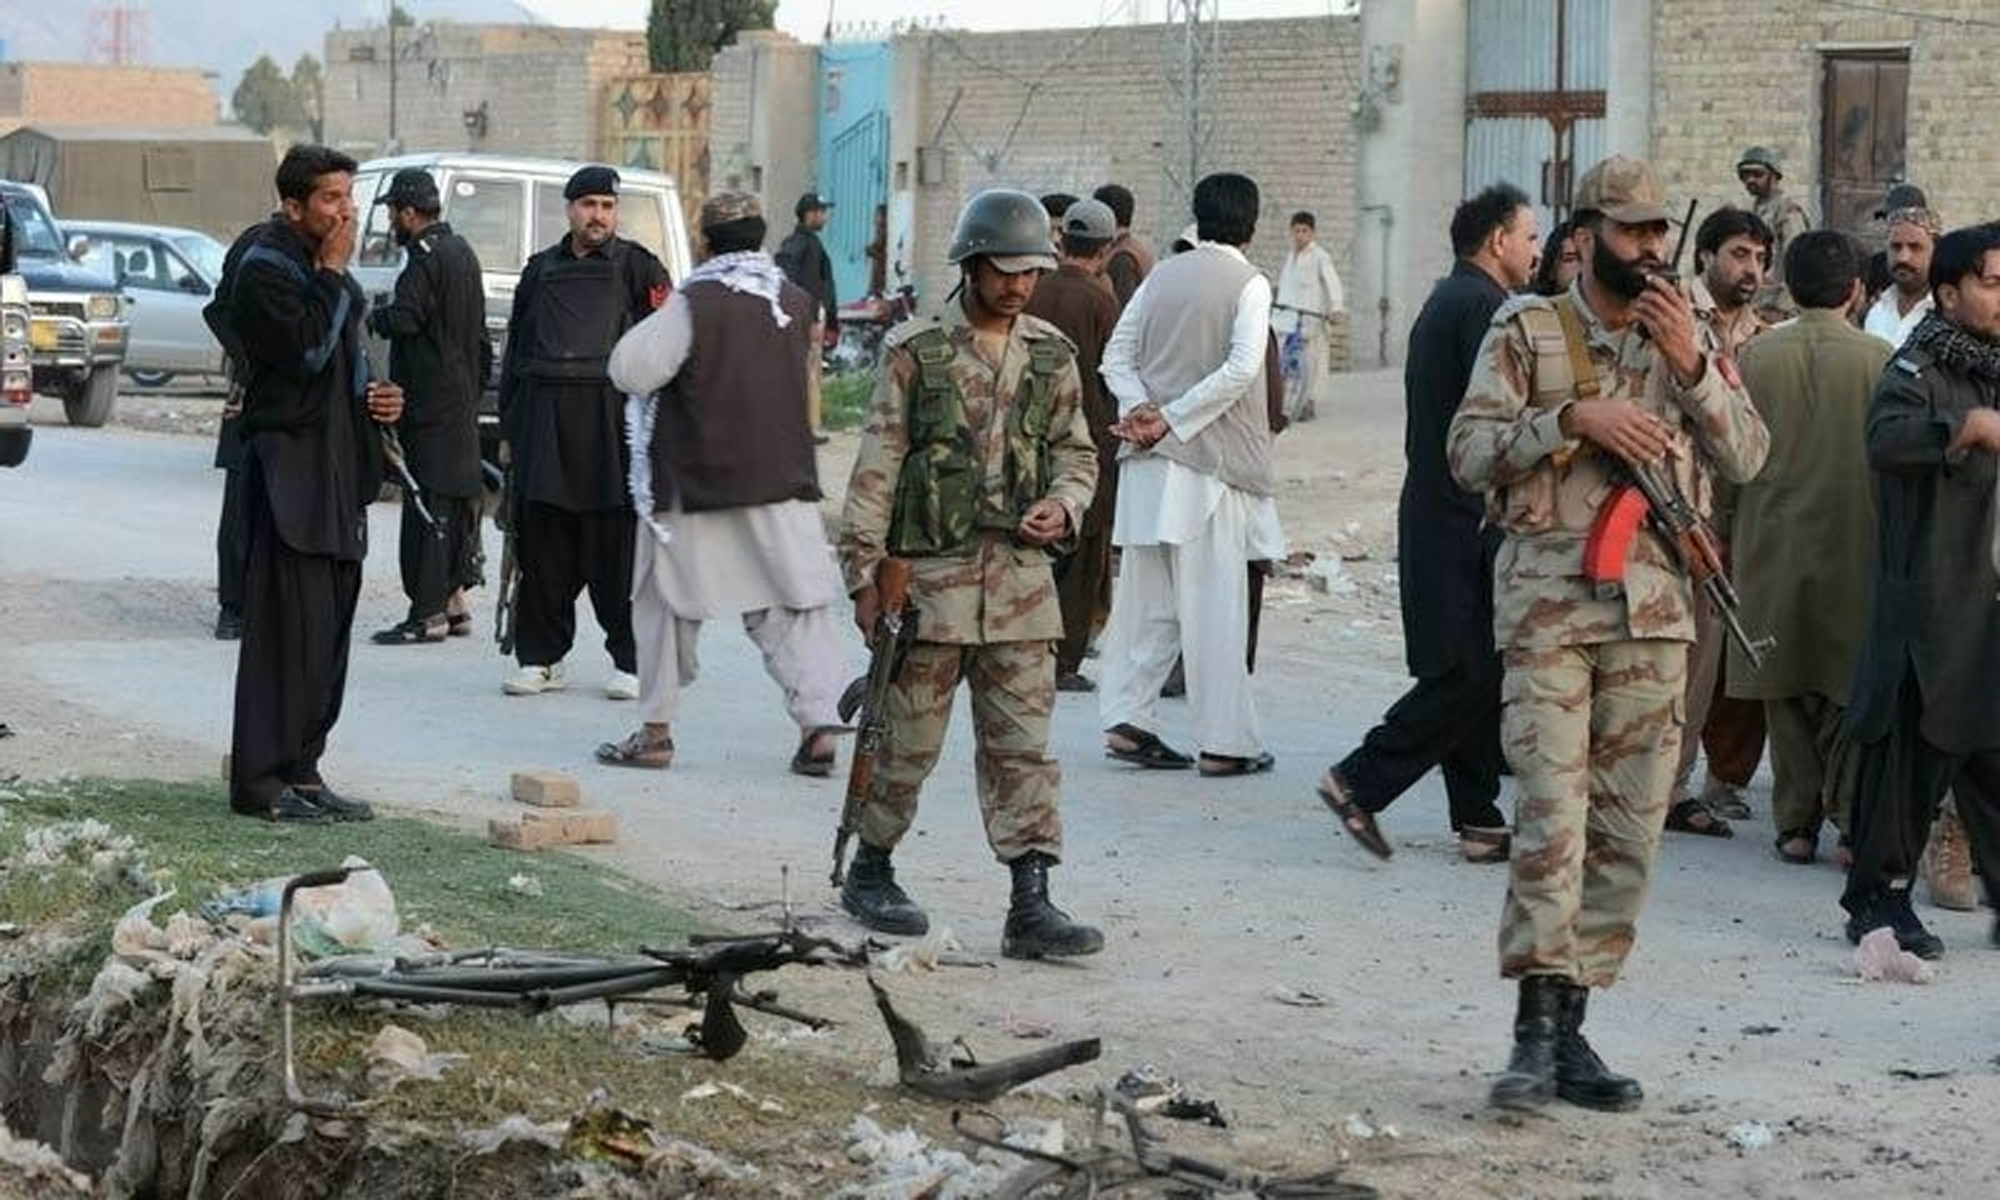 Six security personnel, 12 Militants killed in separate incidents in khyber pakhtunkhwa in Pakistan